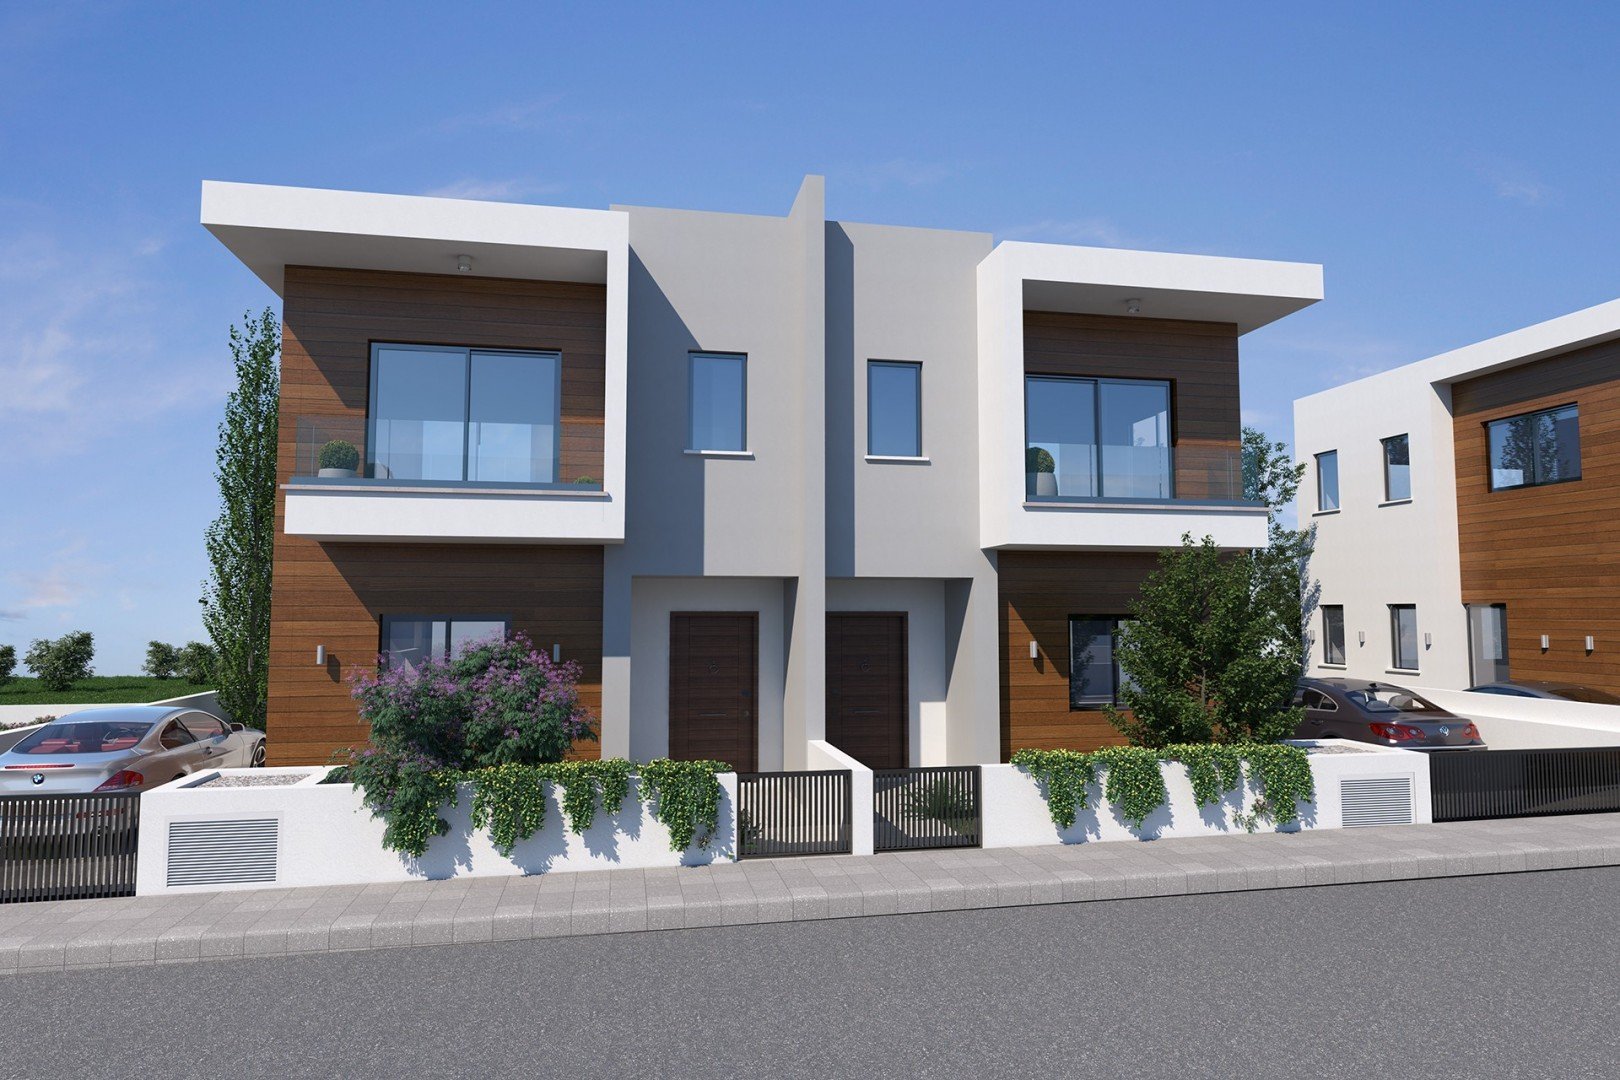 2 Bedroom House for Sale in Potamos Germasogeias, Limassol District